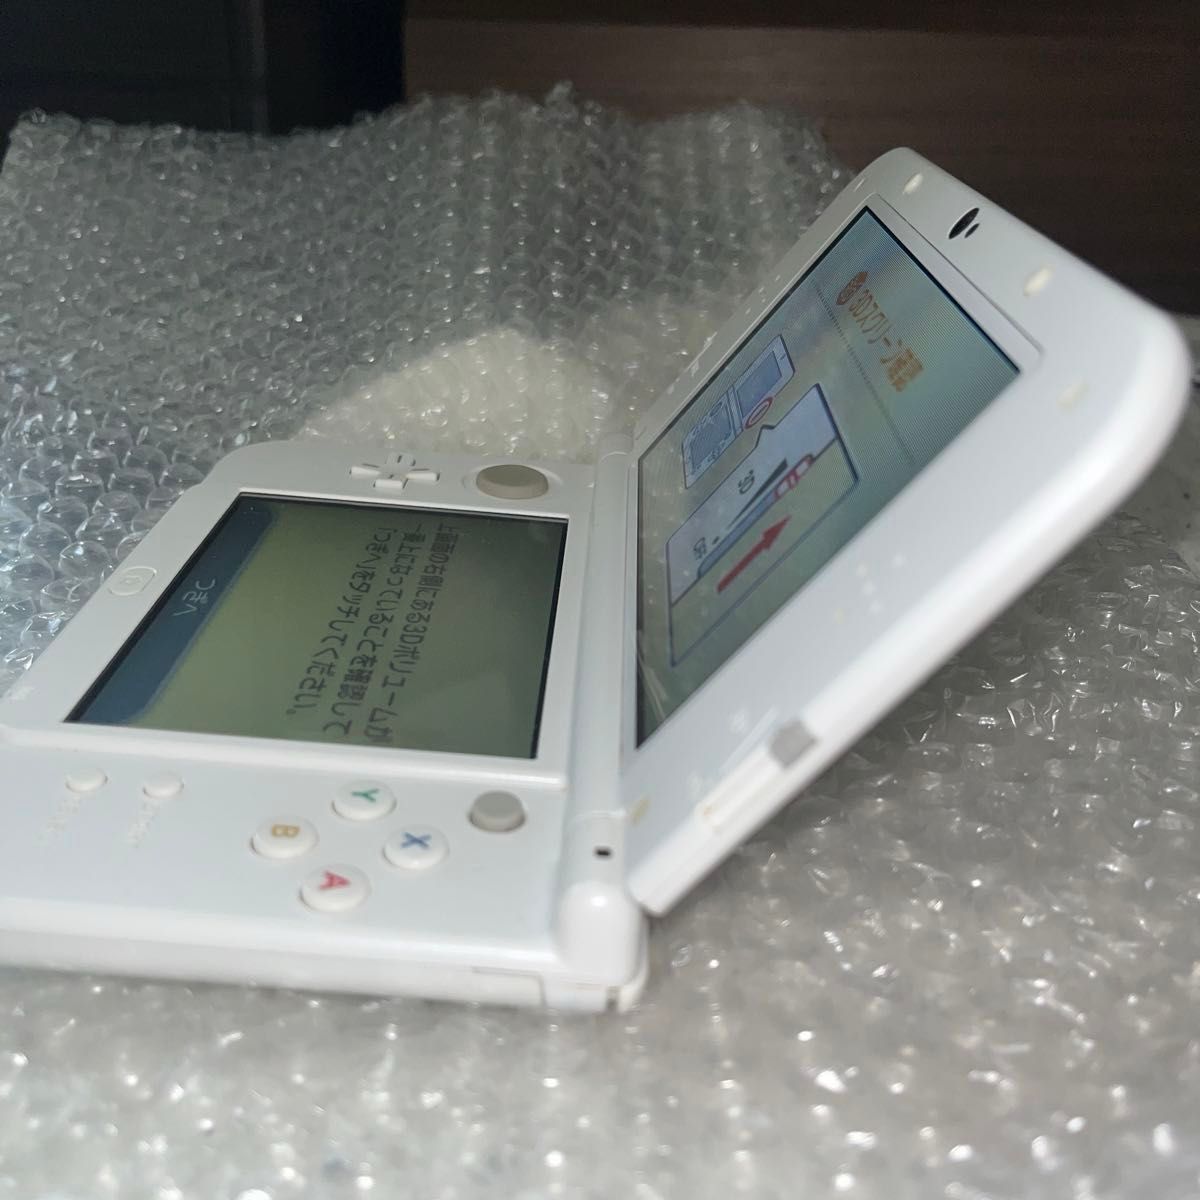 newNintendo3DS LL（ソフト6本つき）